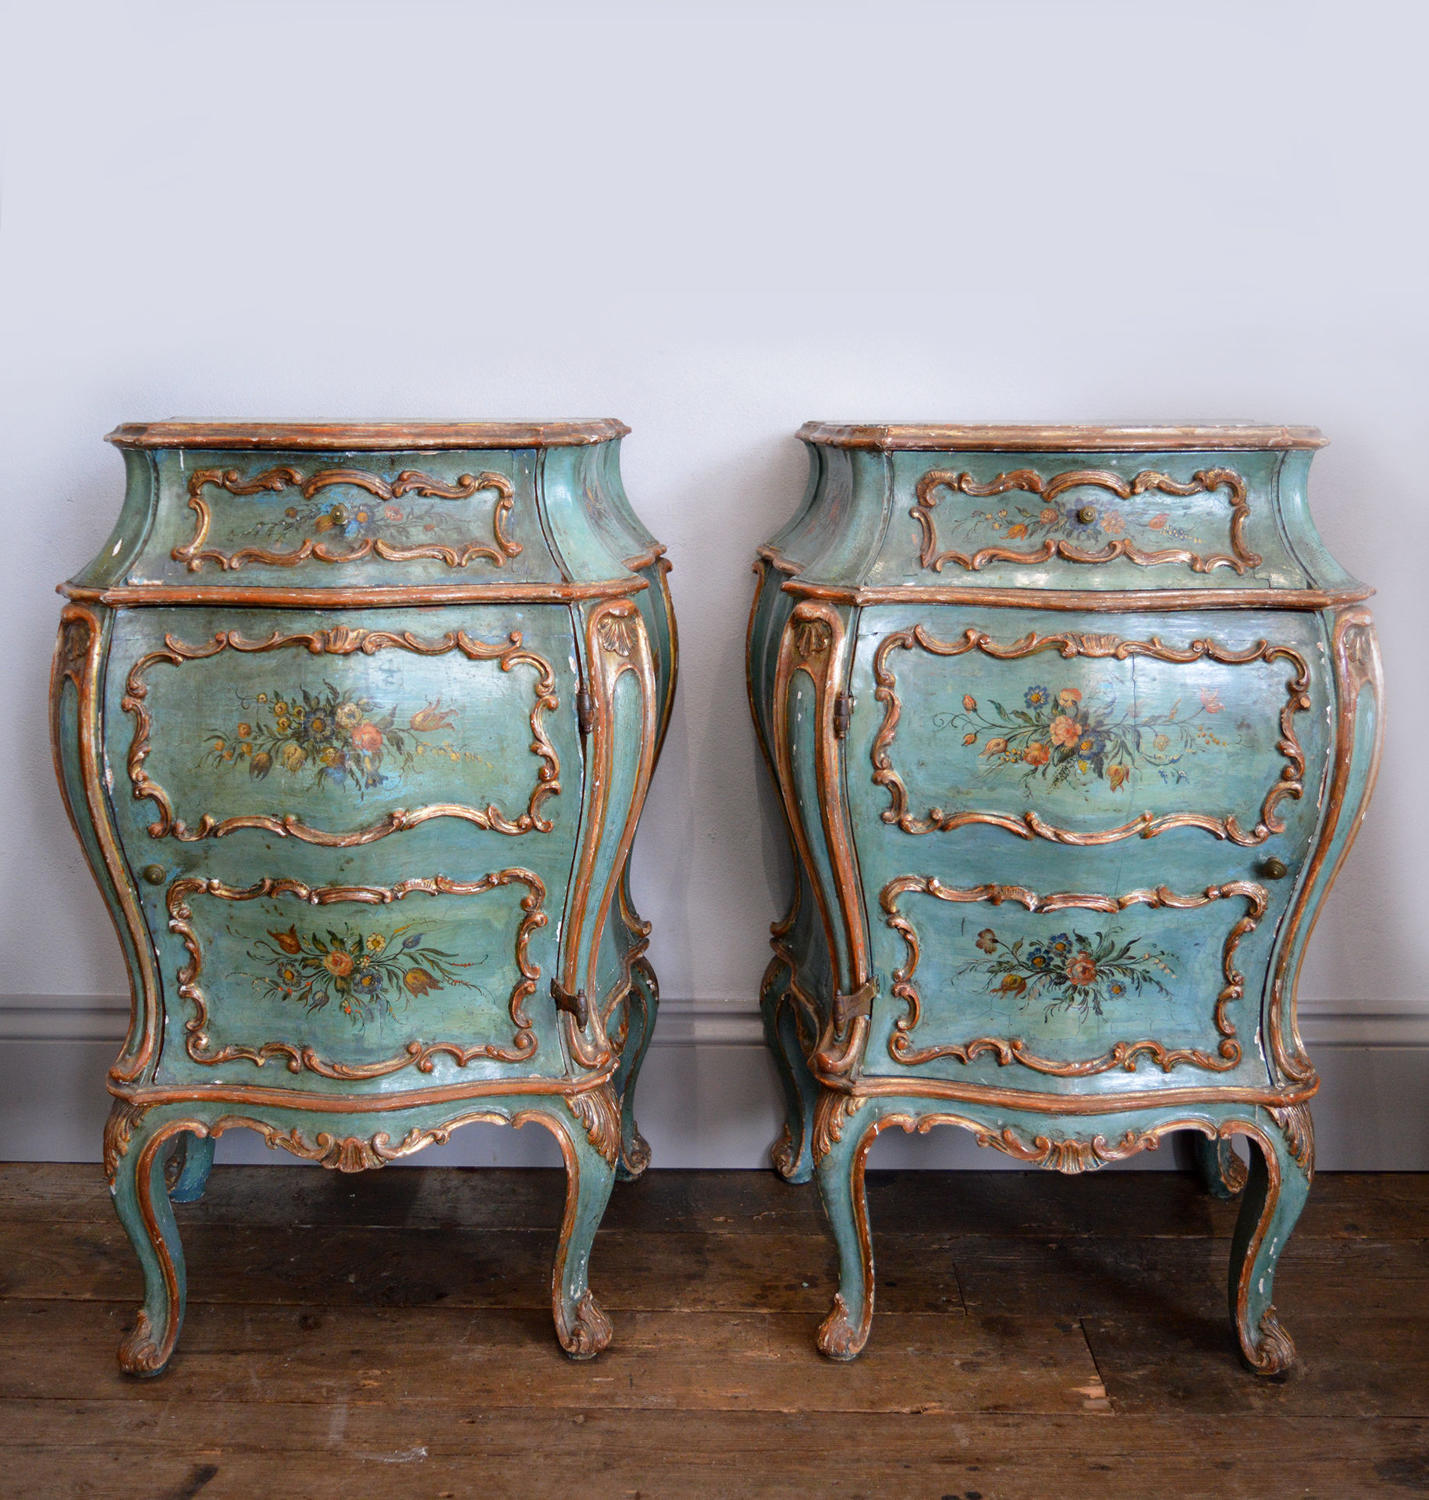 Pair of Hand Painted Venetian Bedside cabinets